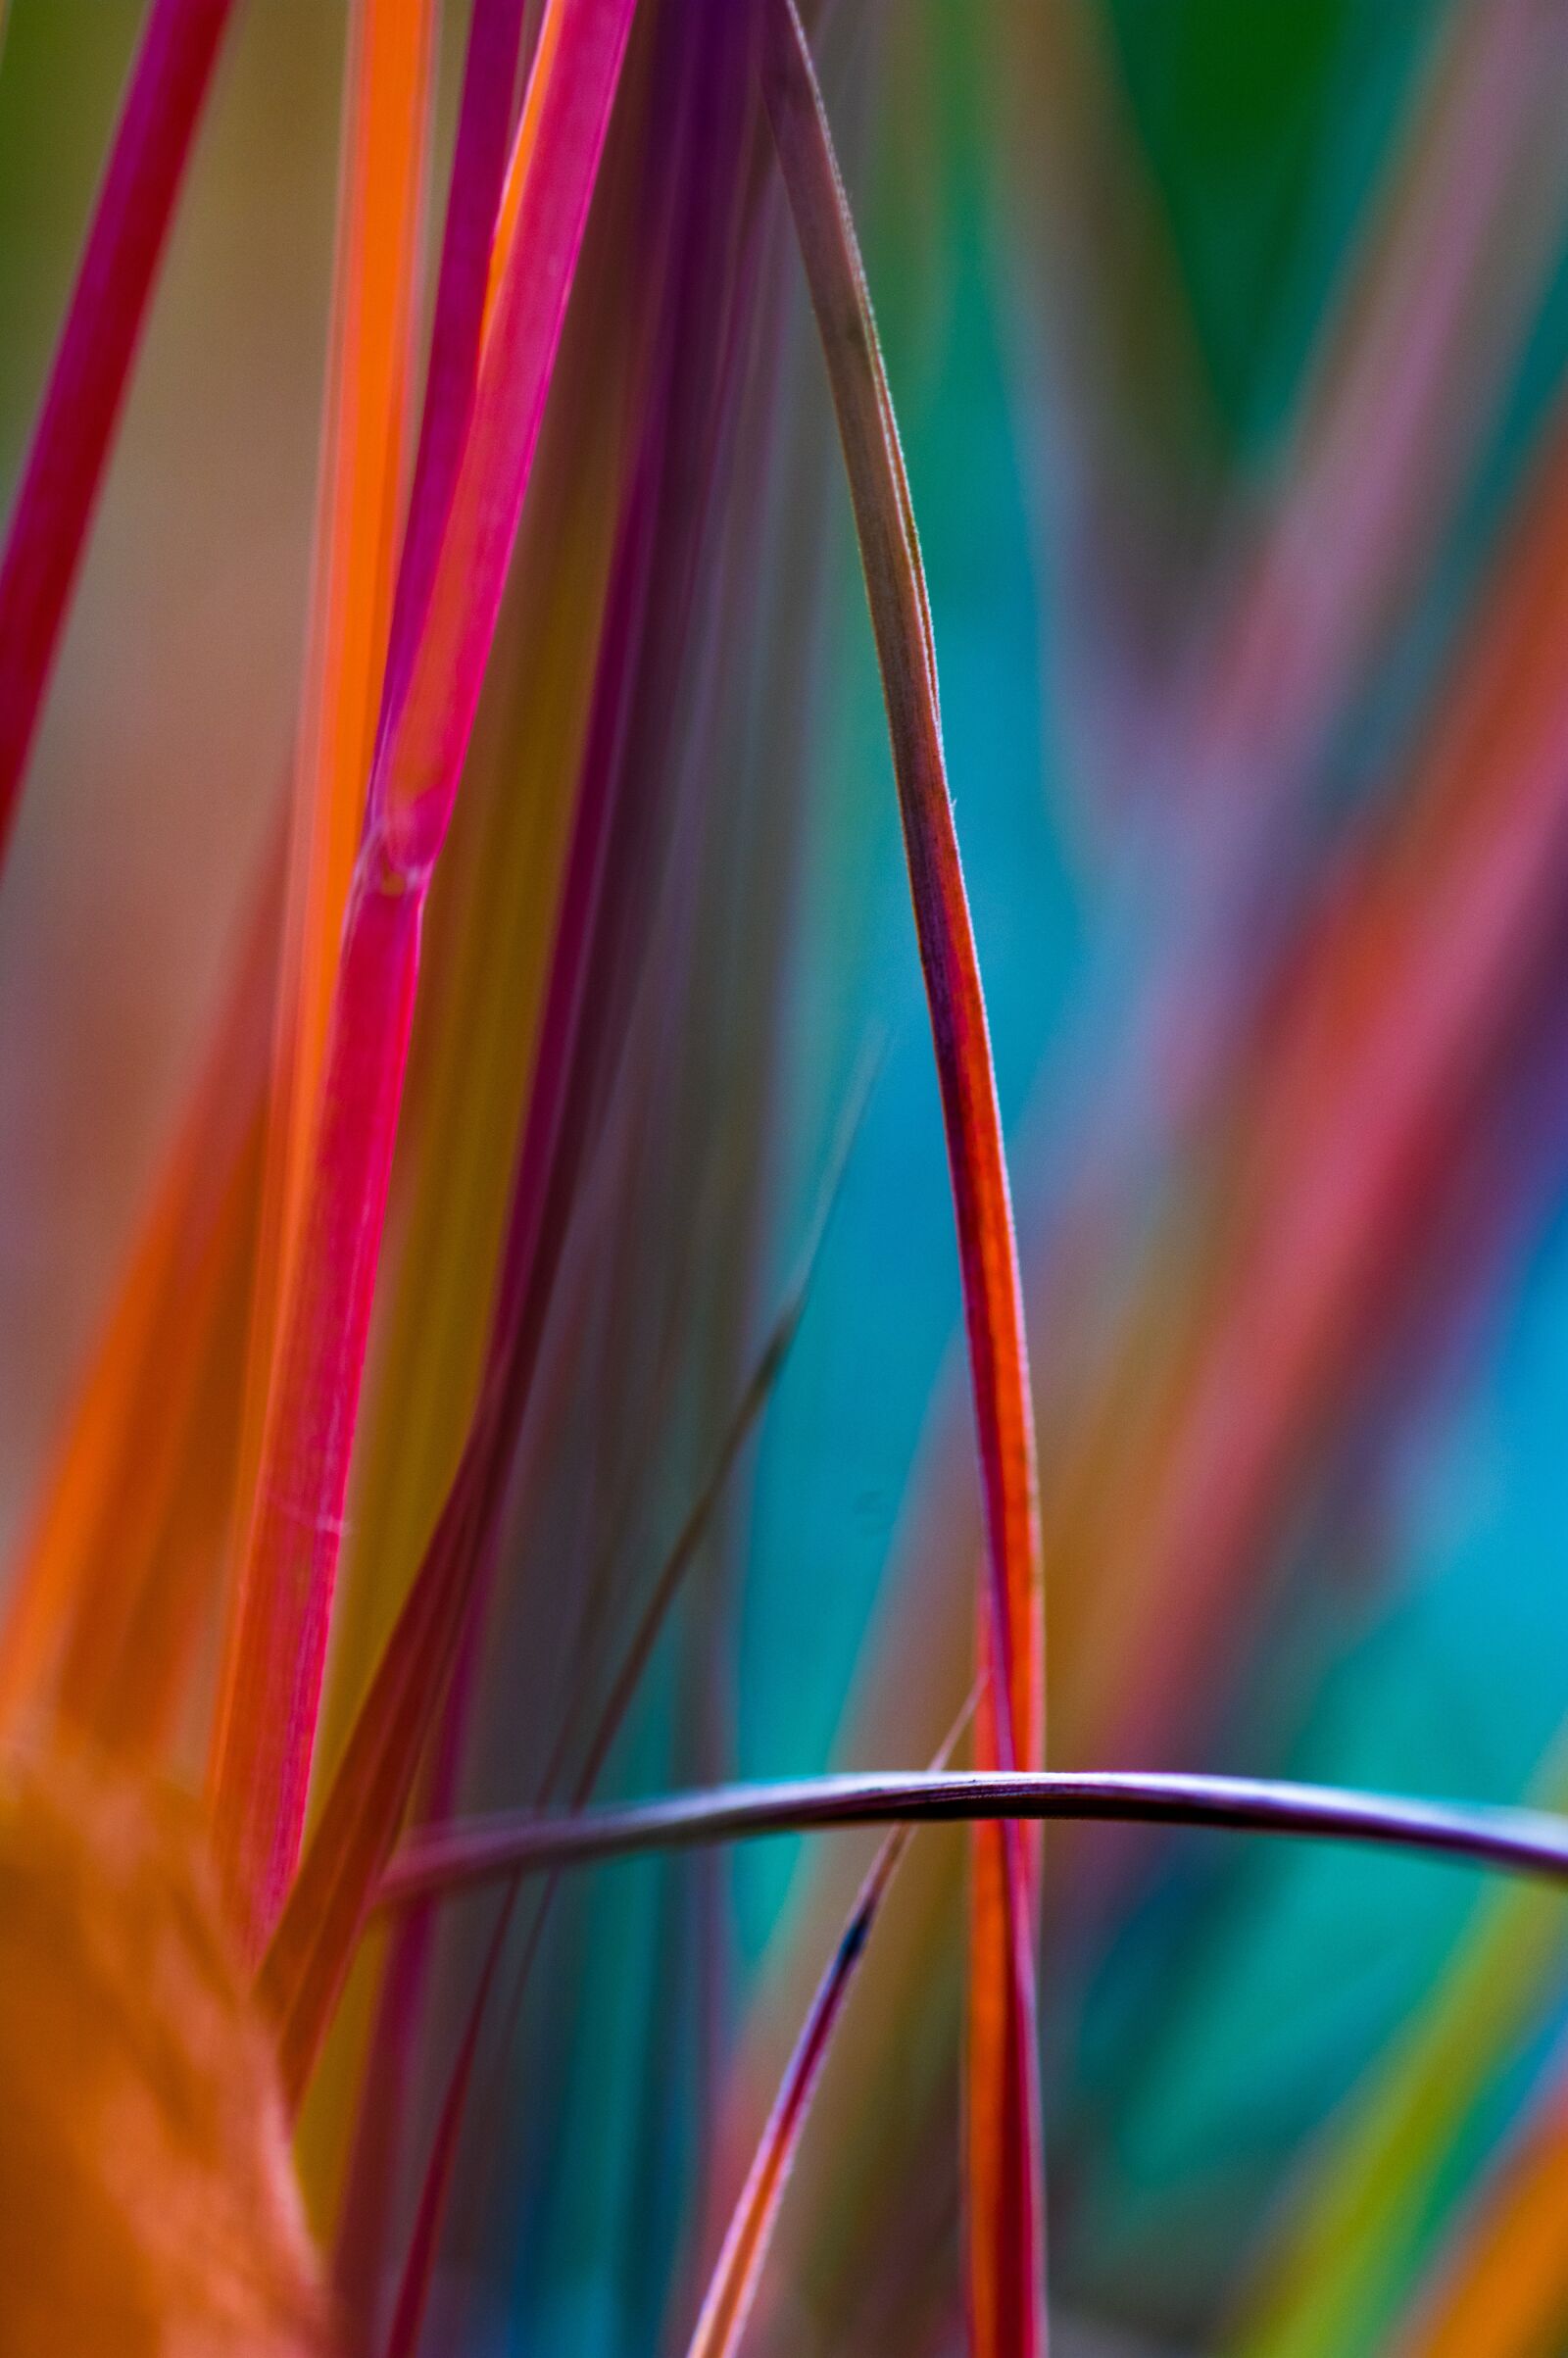 Pentax KP sample photo. Grass, abstract, detail photography